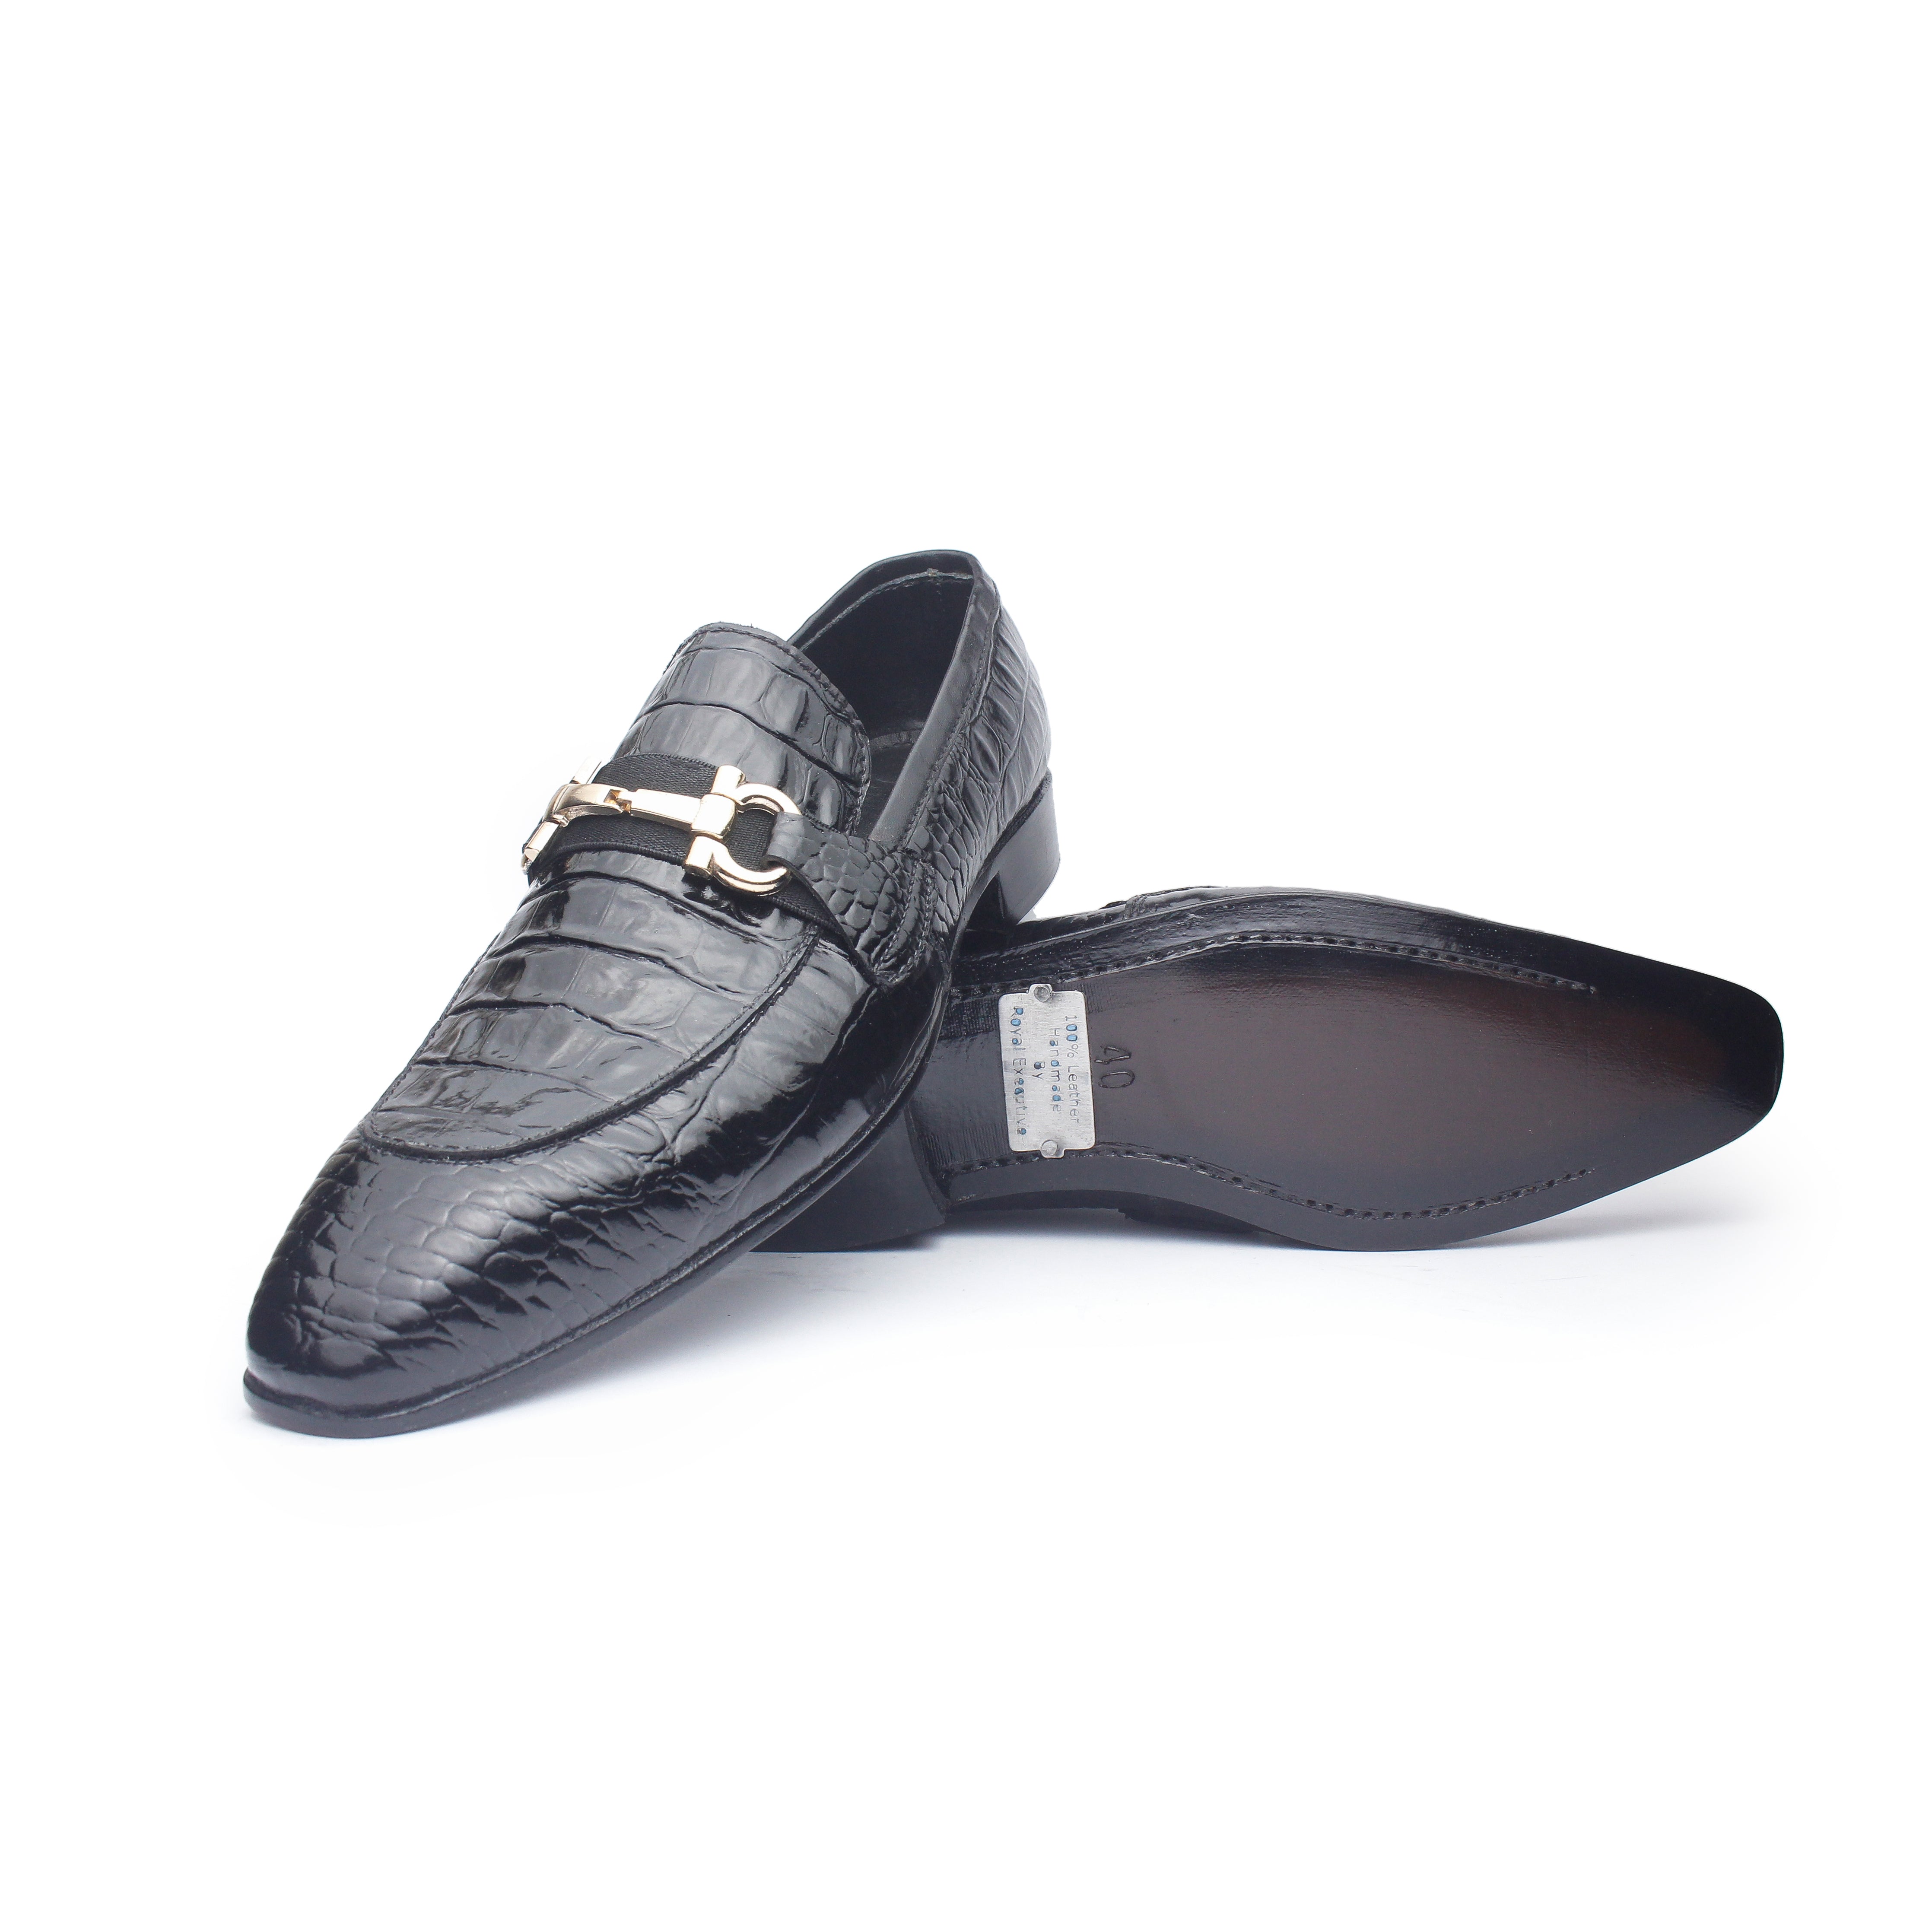 Studio Crx Black - Premium shoes from royalstepshops - Just Rs.9000! Shop now at ROYAL STEP